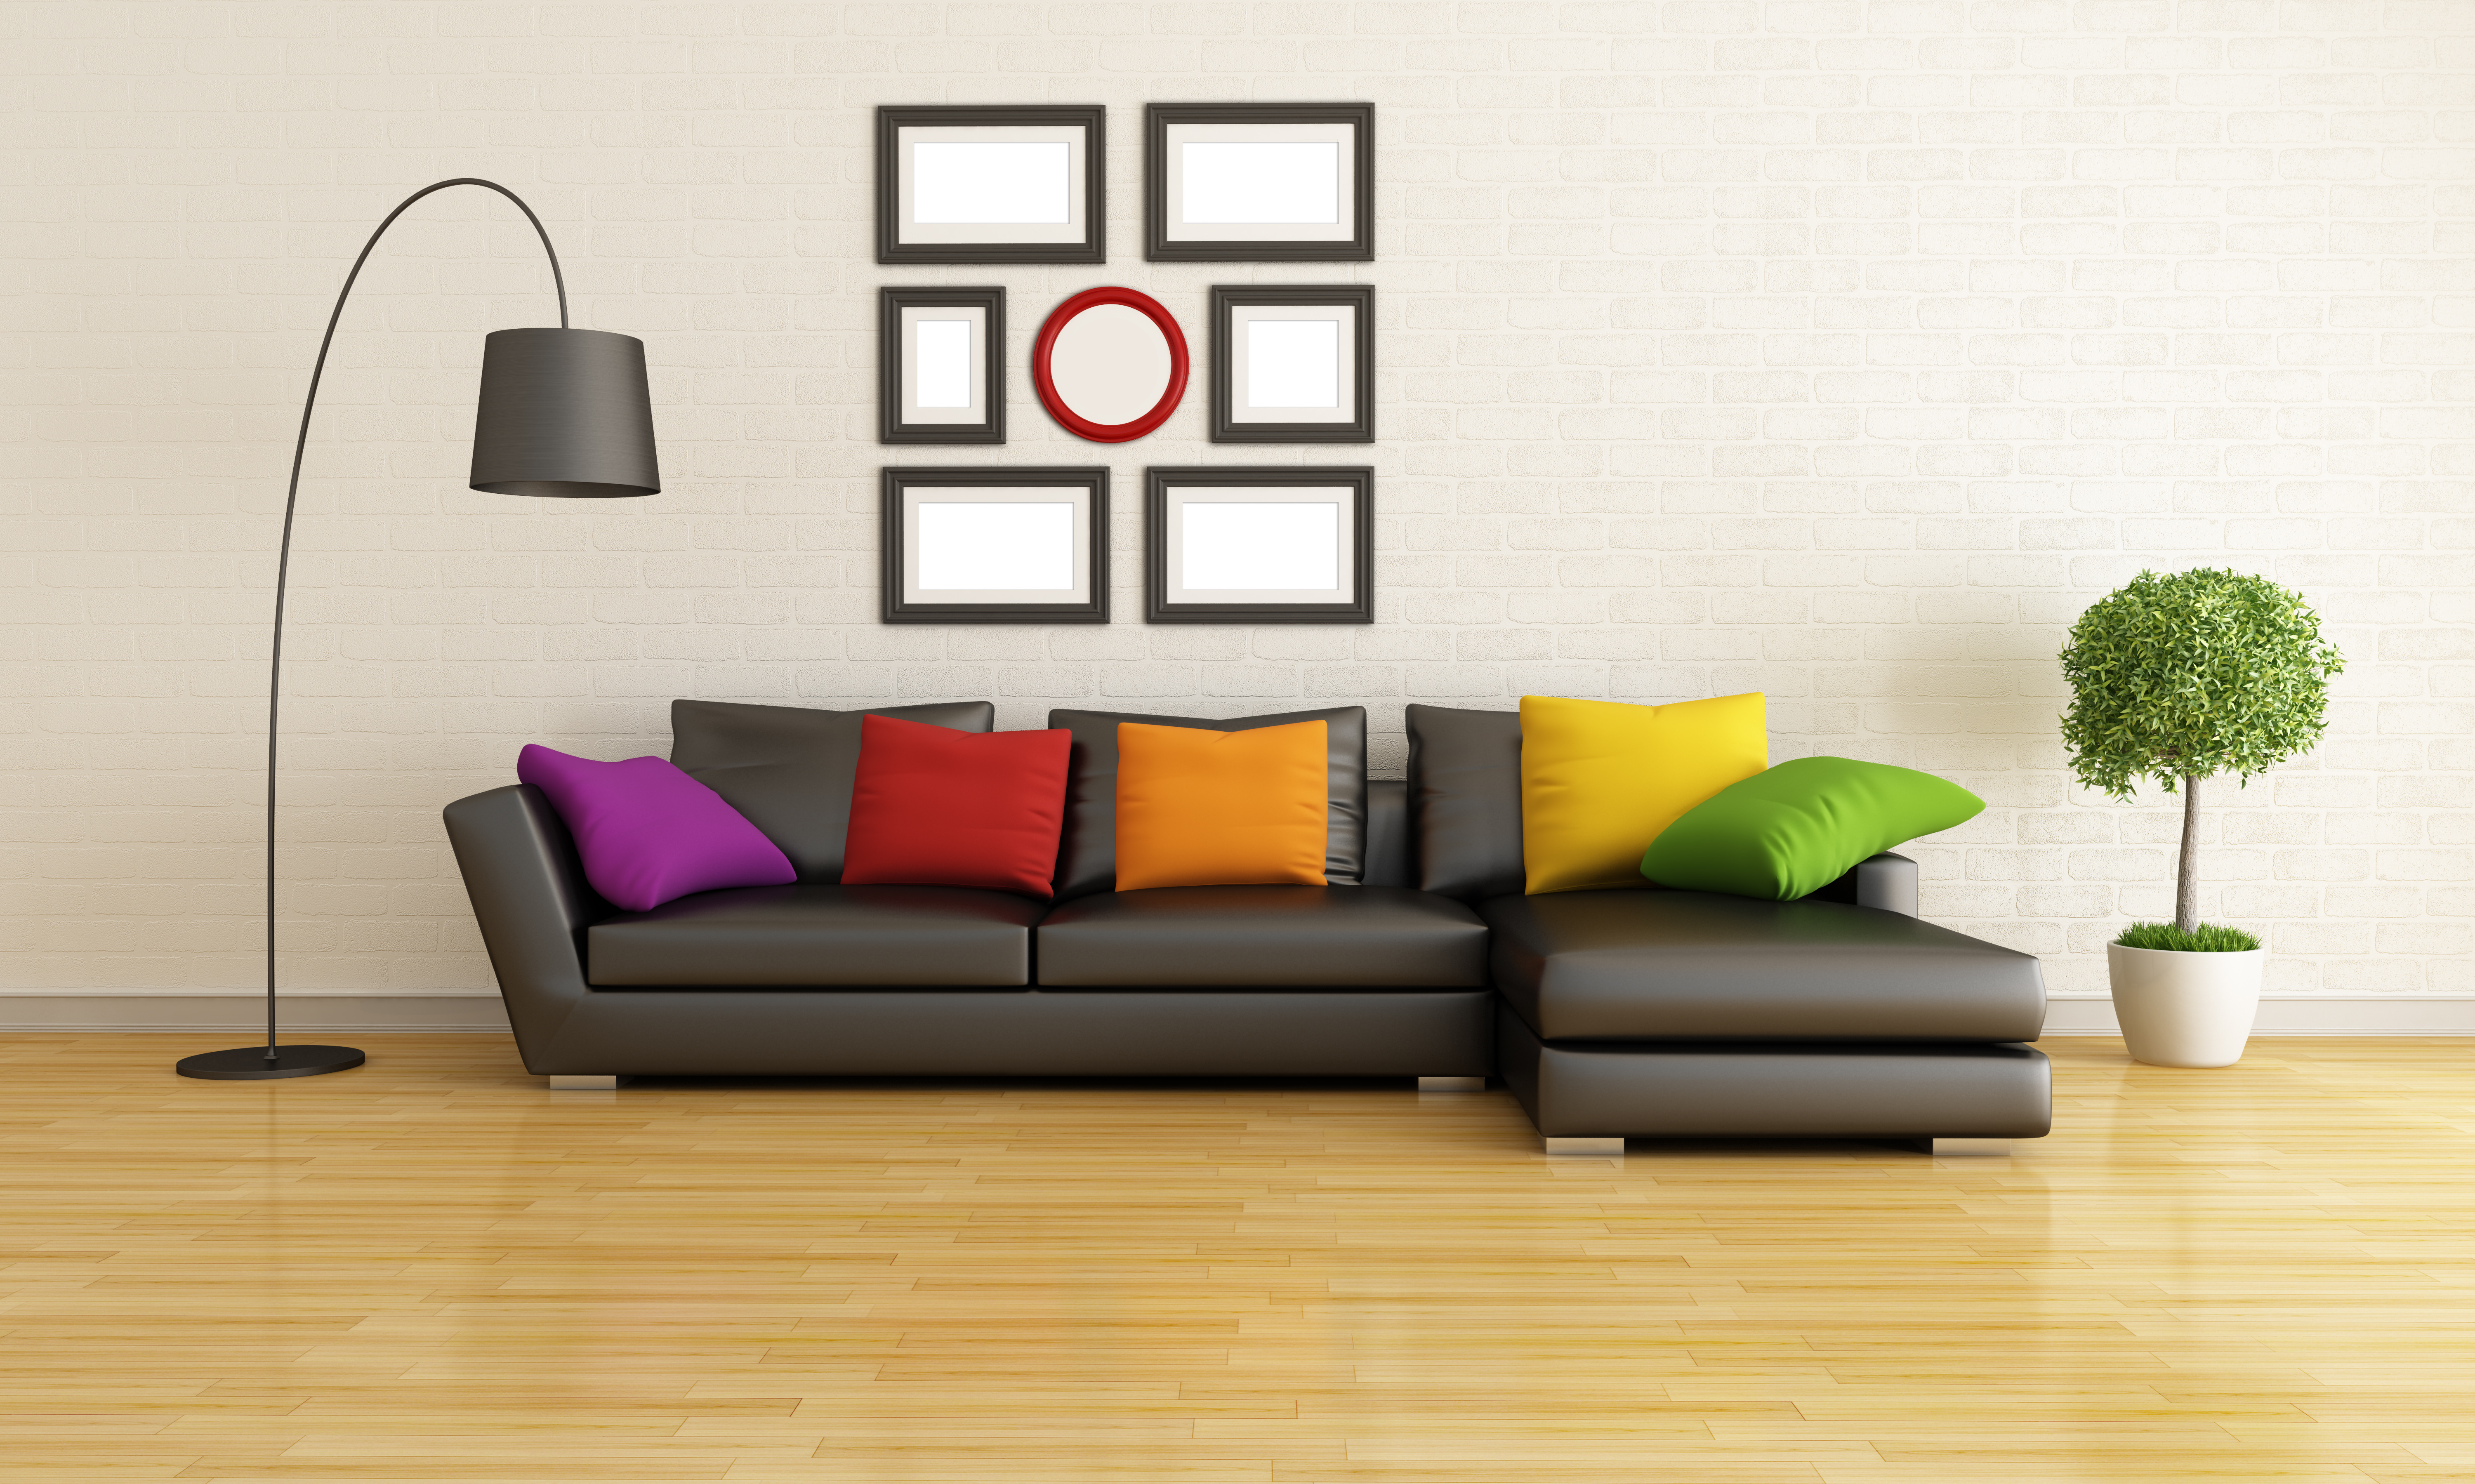 Decorate your home for cheap Image